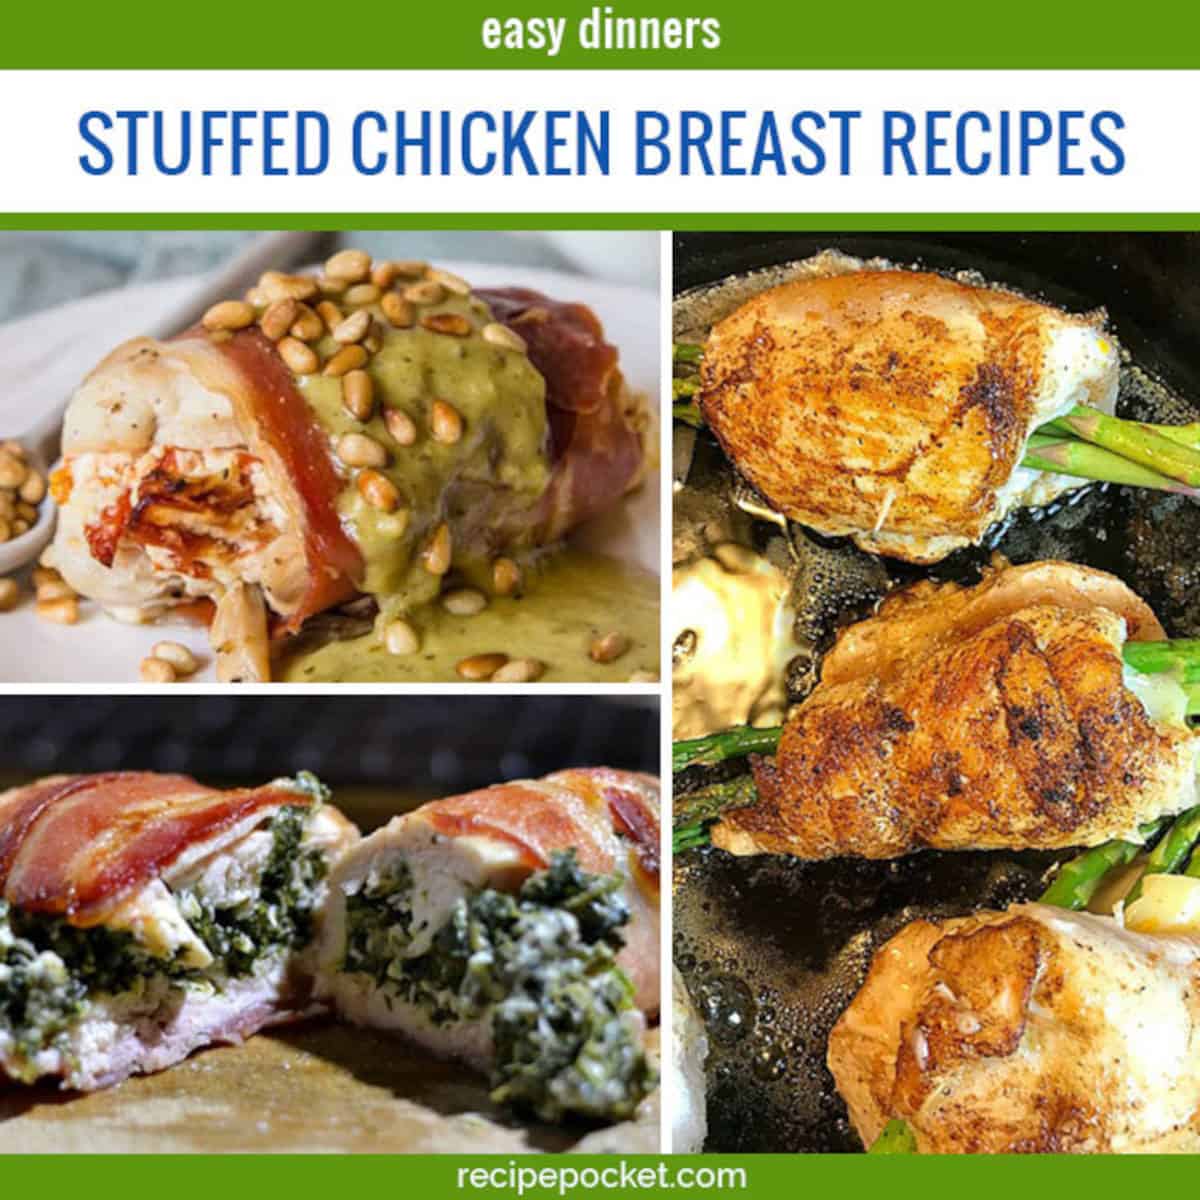 Image for recipe round up on stuffed chicken breast recipes.